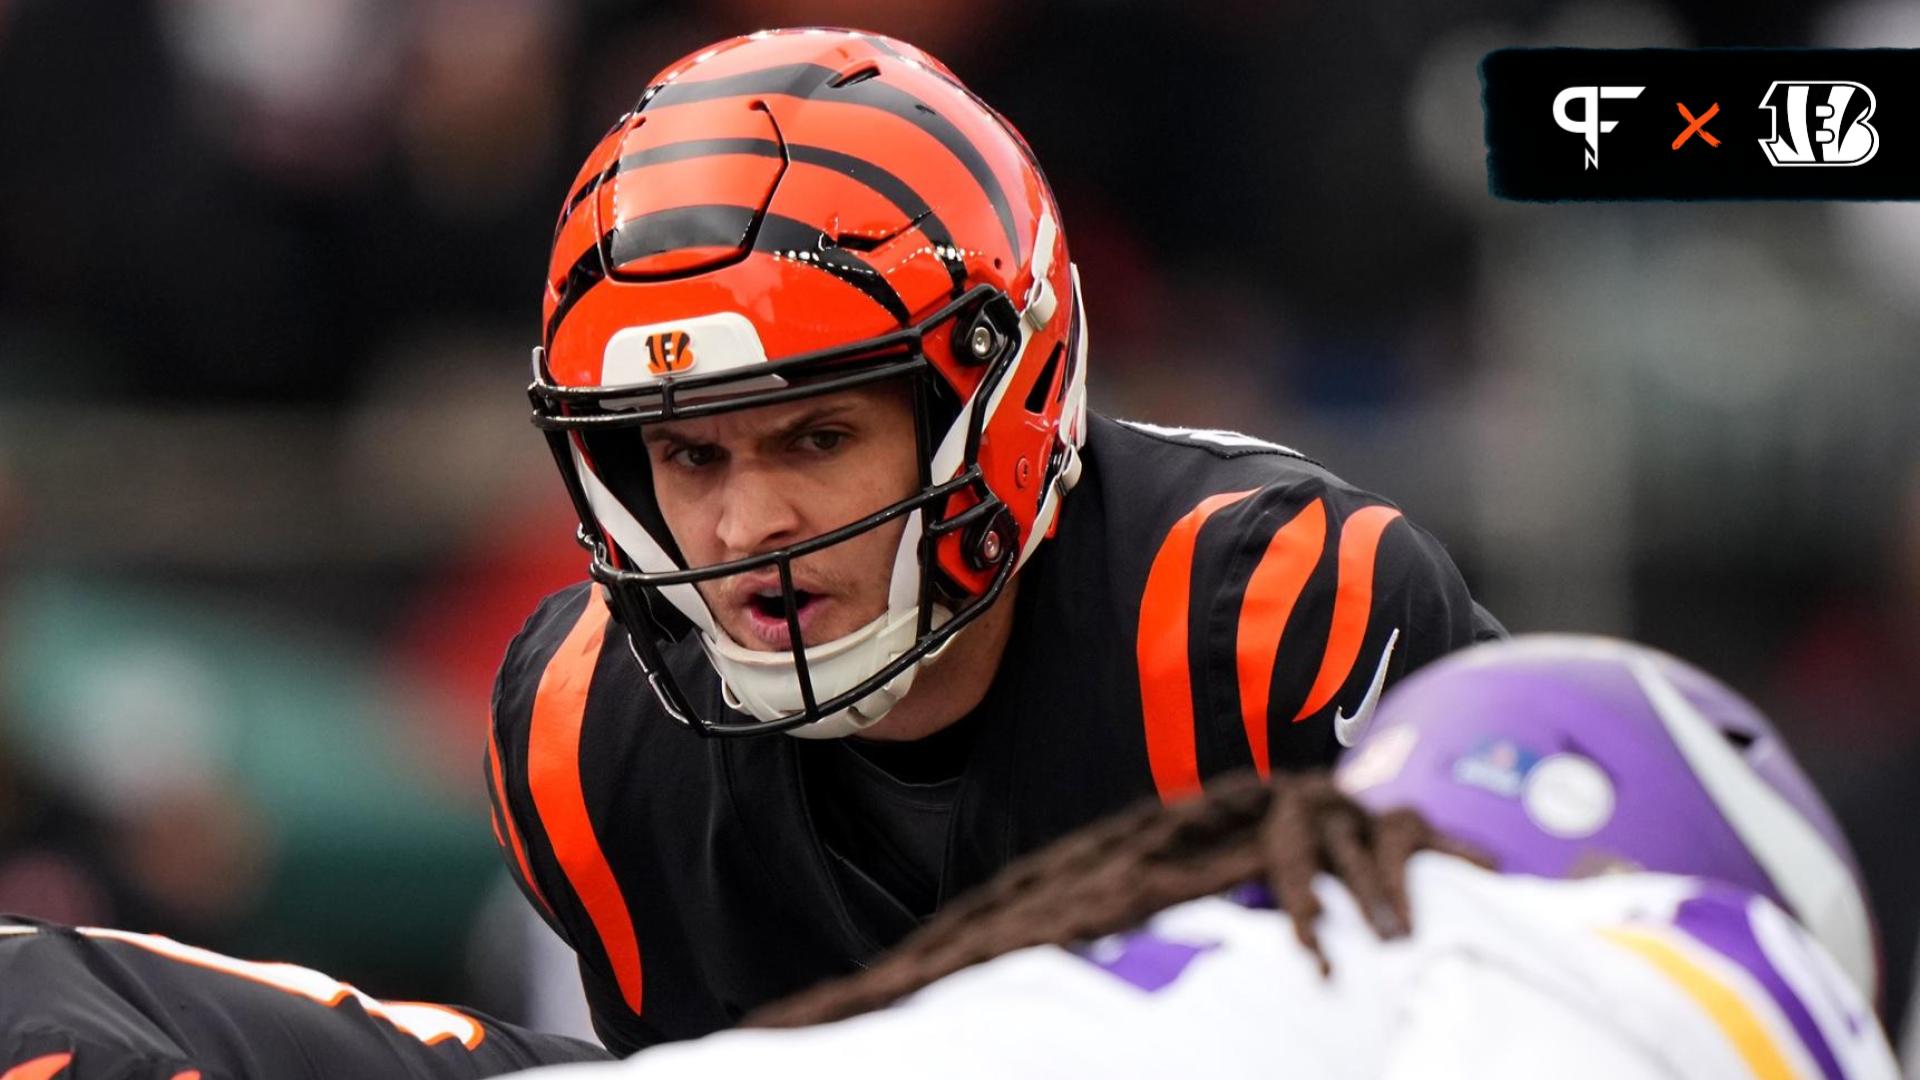 Cincinnati Bengals quarterback Jake Browning (6) prepares to take the snap in in the first quarter of the game against the Minnesota Vikings at Paycor Stadium.